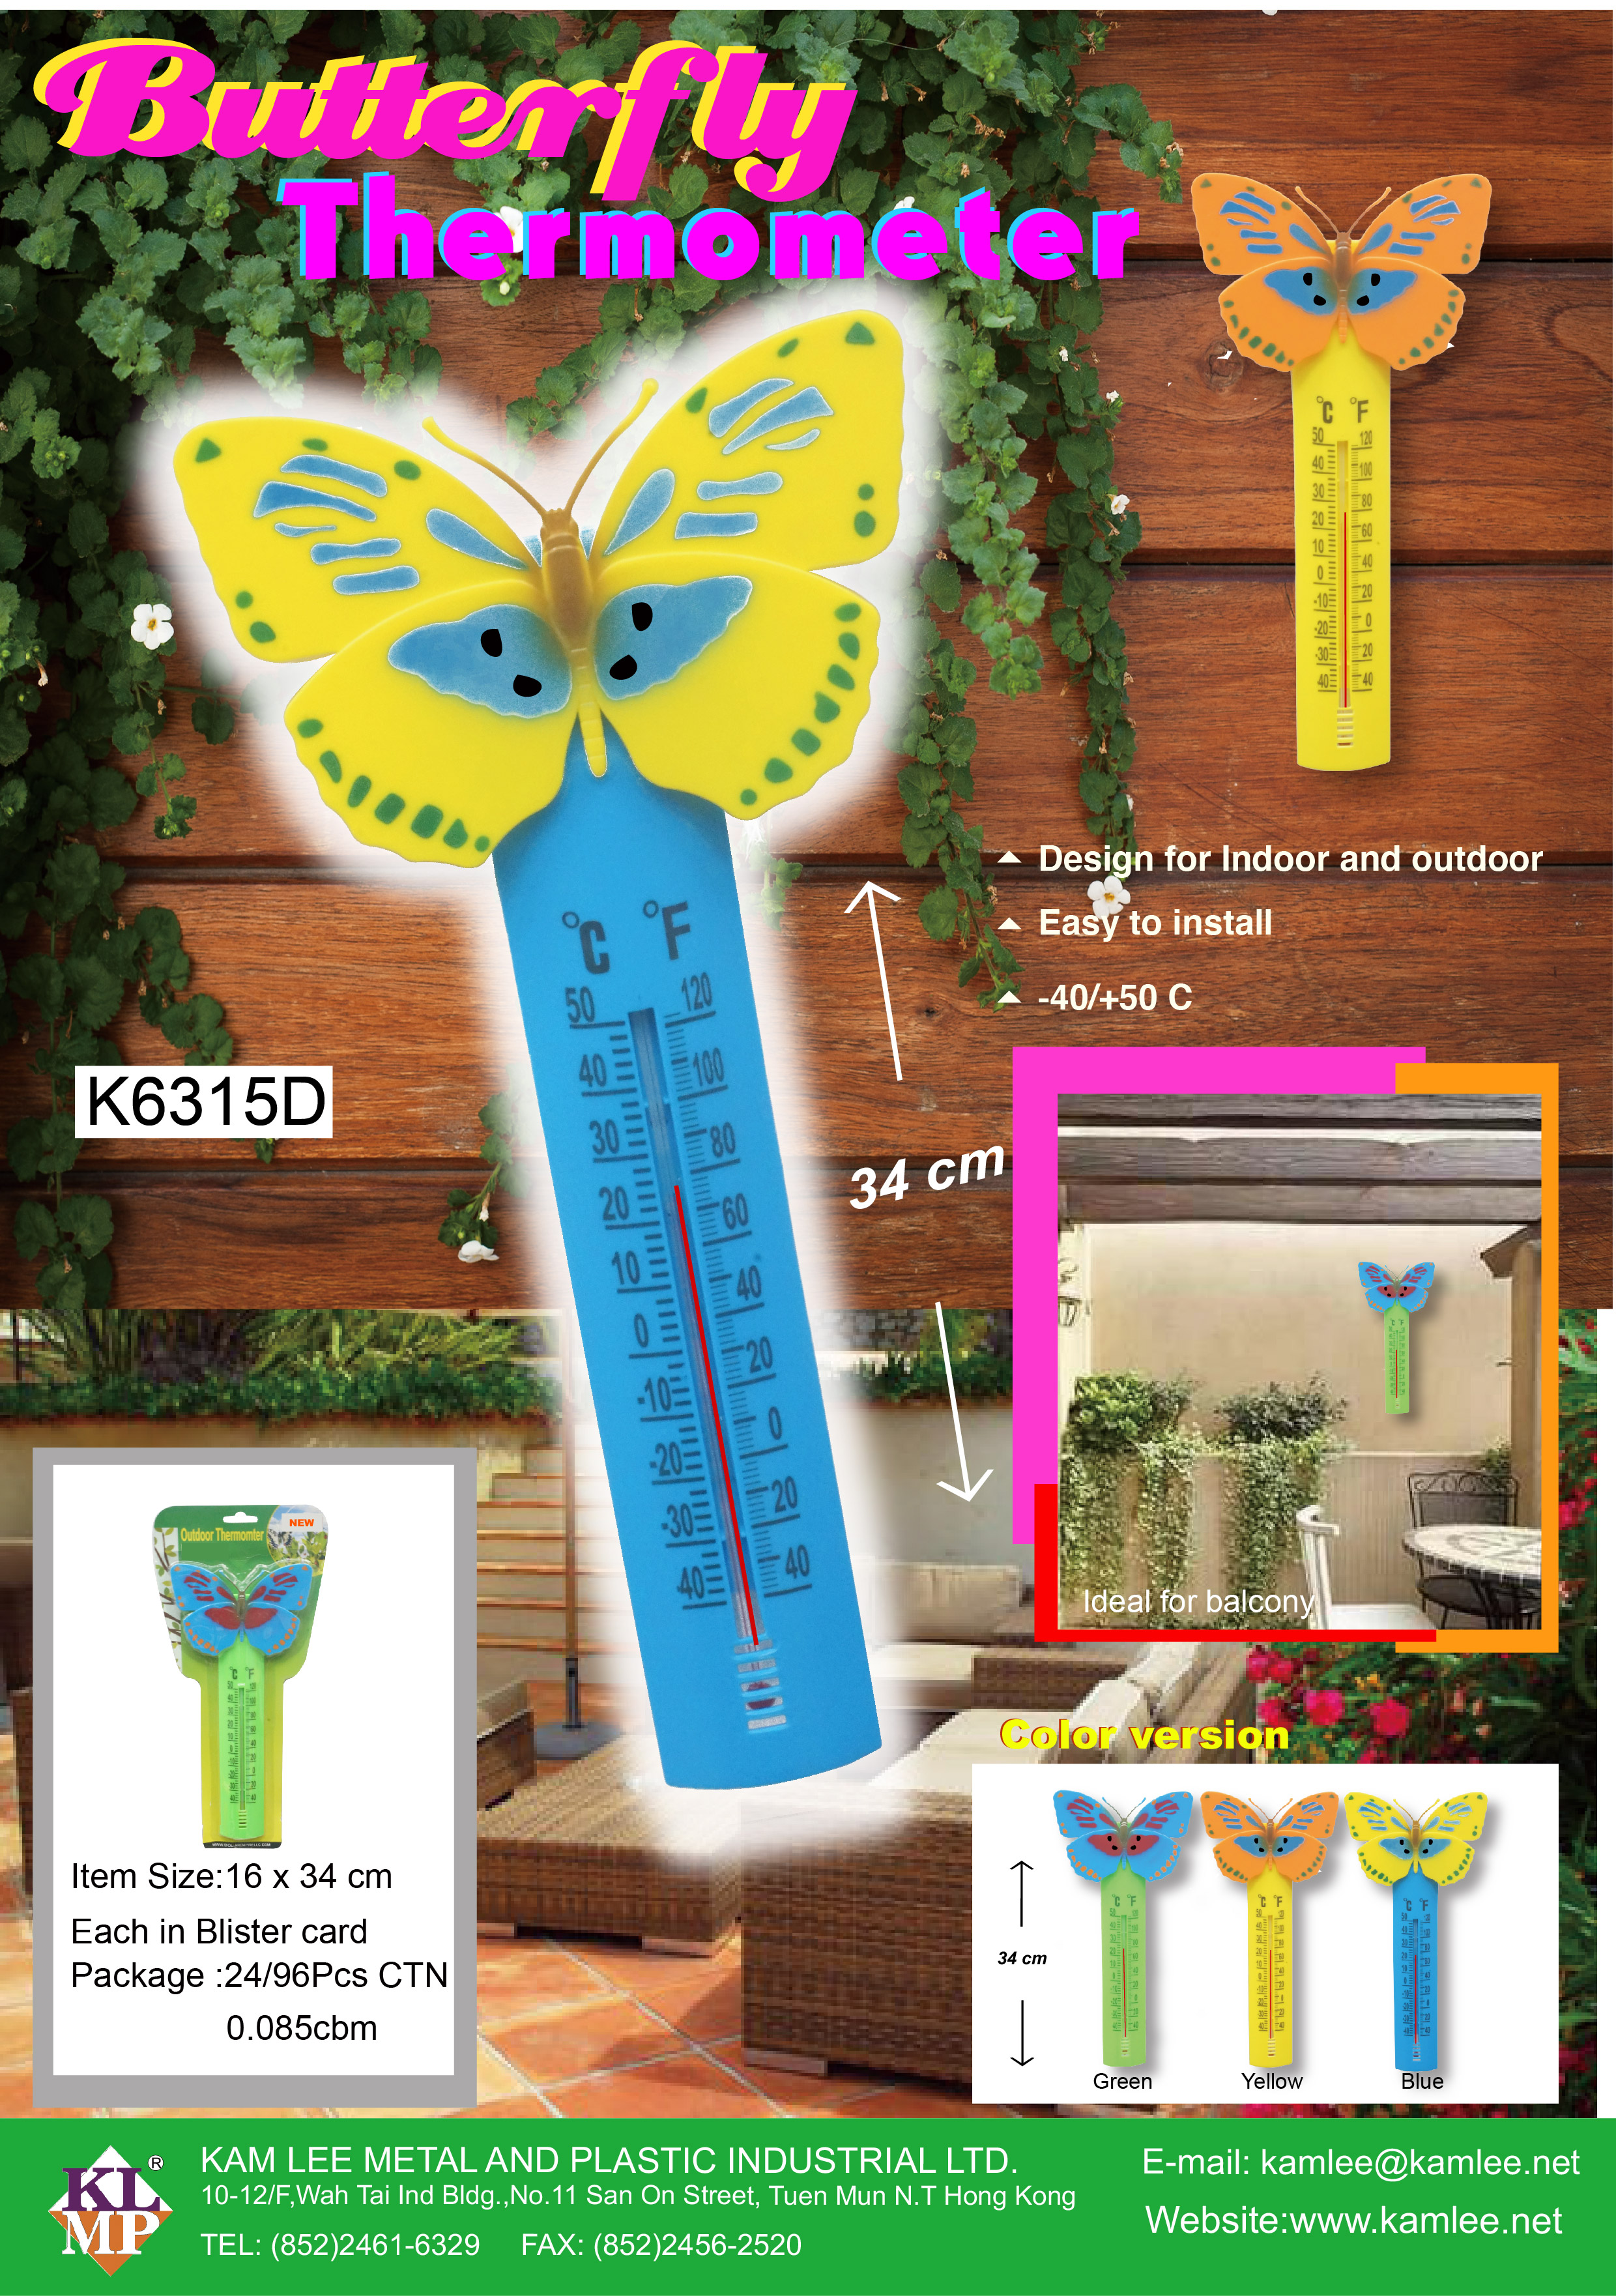 K6315D BUTTERFLY THERMONETER